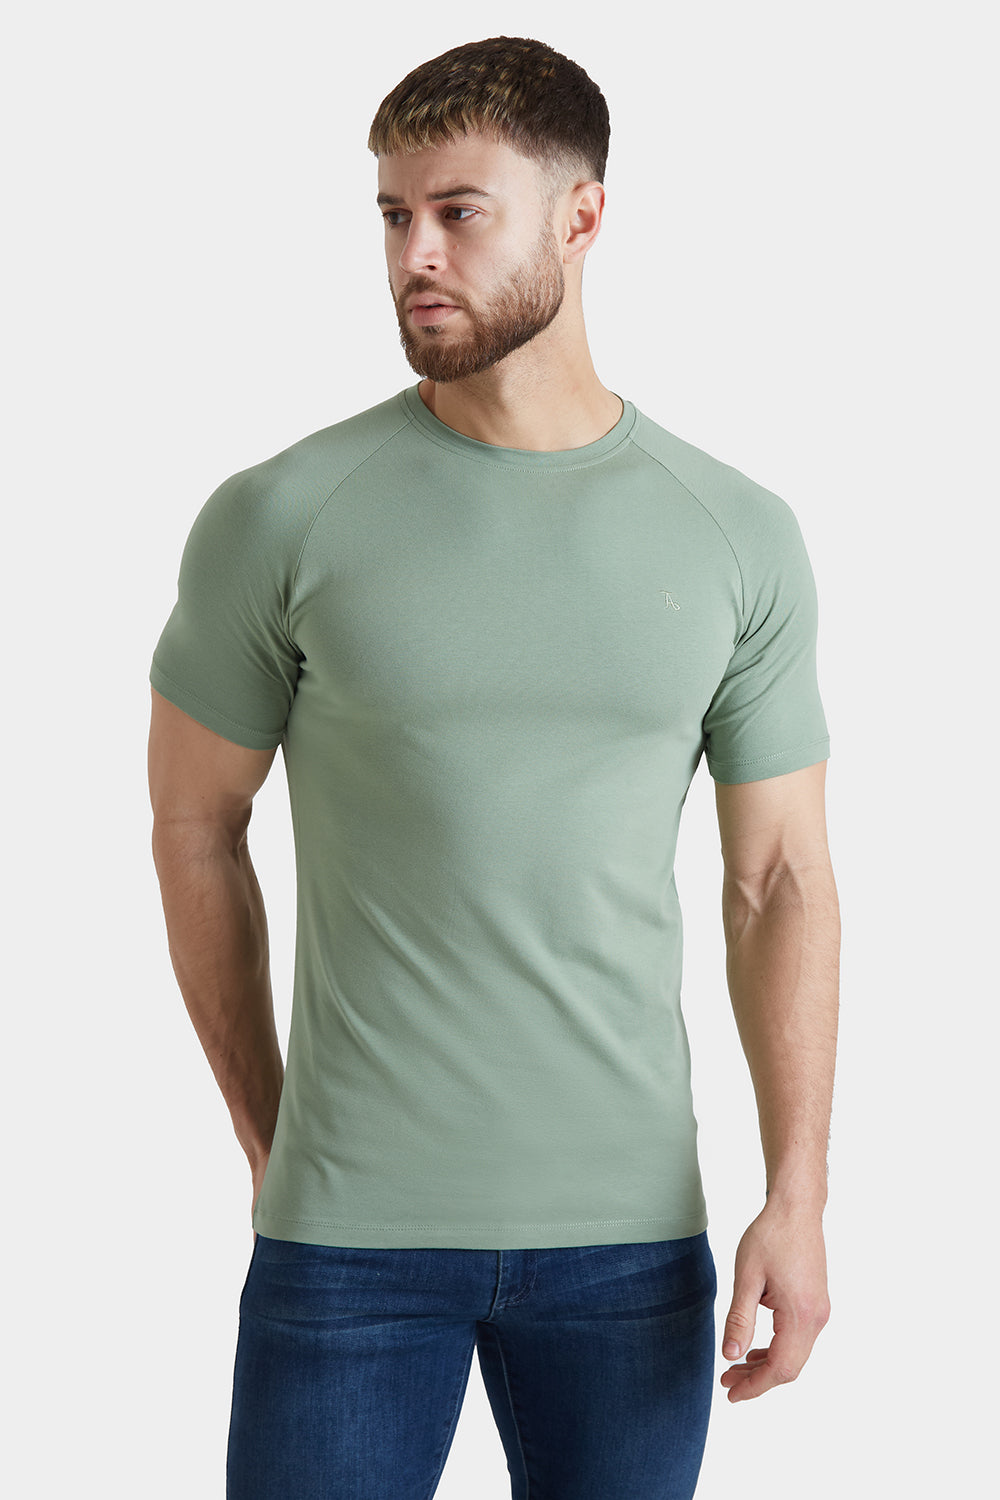 Premium Muscle Fit T-Shirt in Soft Kale - TAILORED ATHLETE - ROW